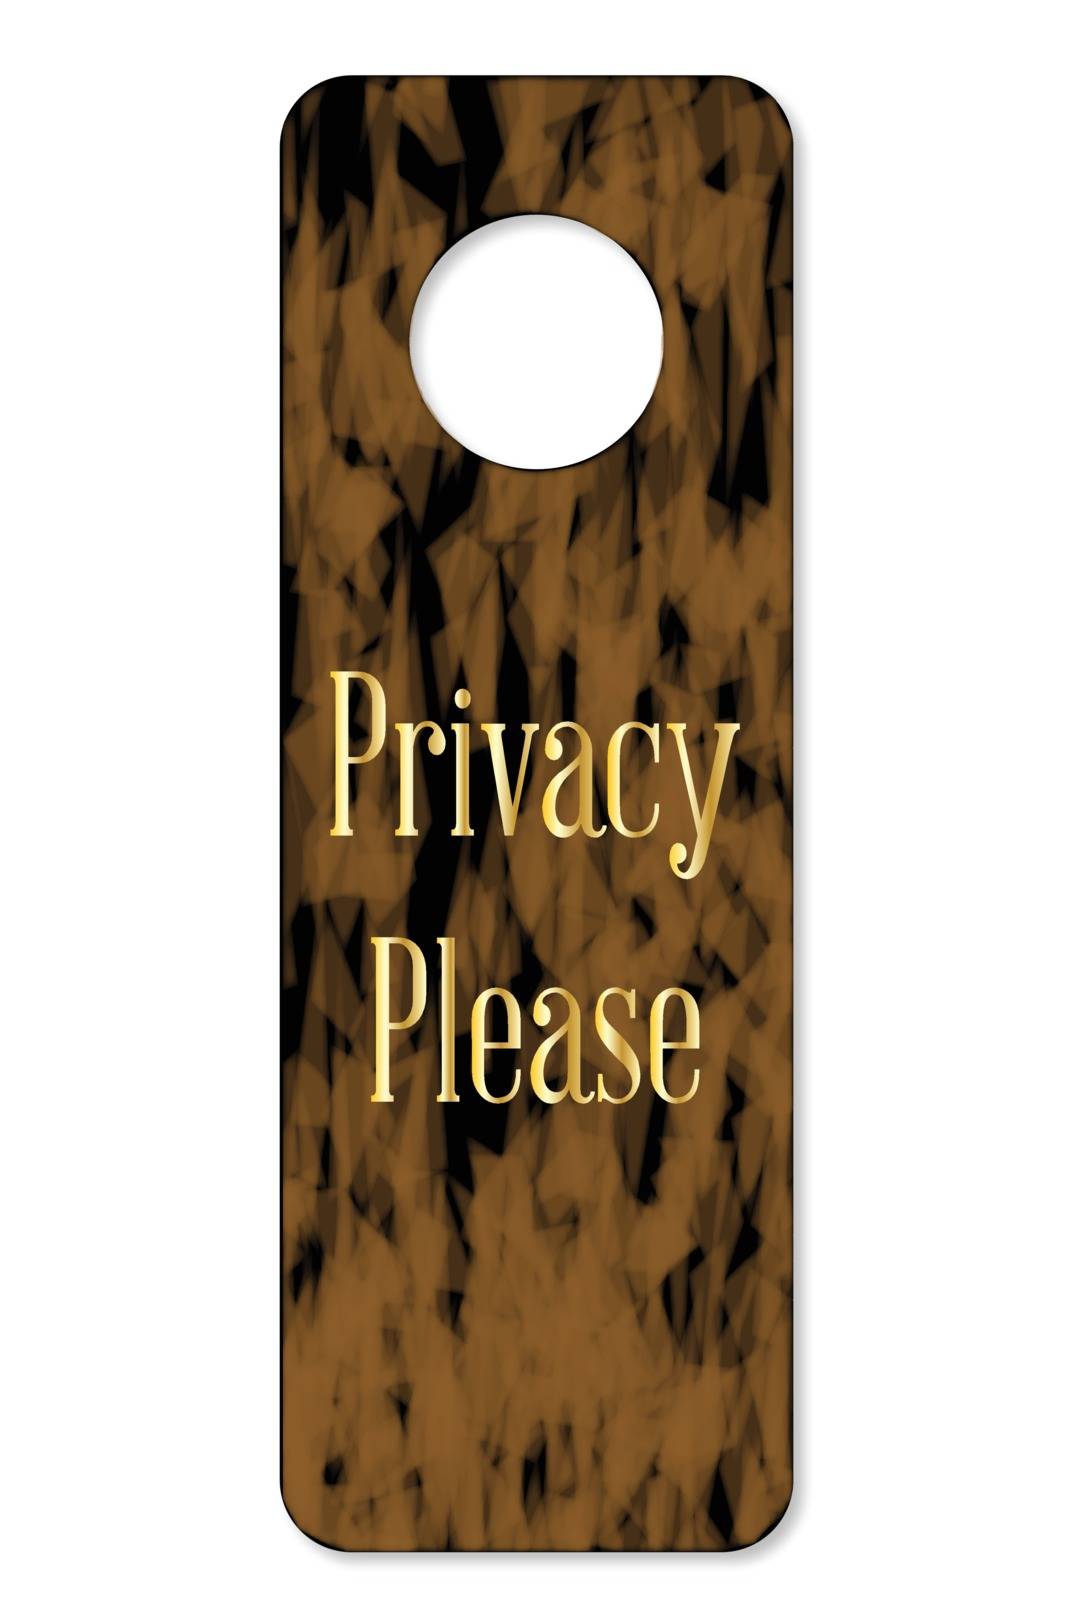 Privacy Please Door Knob Sign by Bigalbaloo